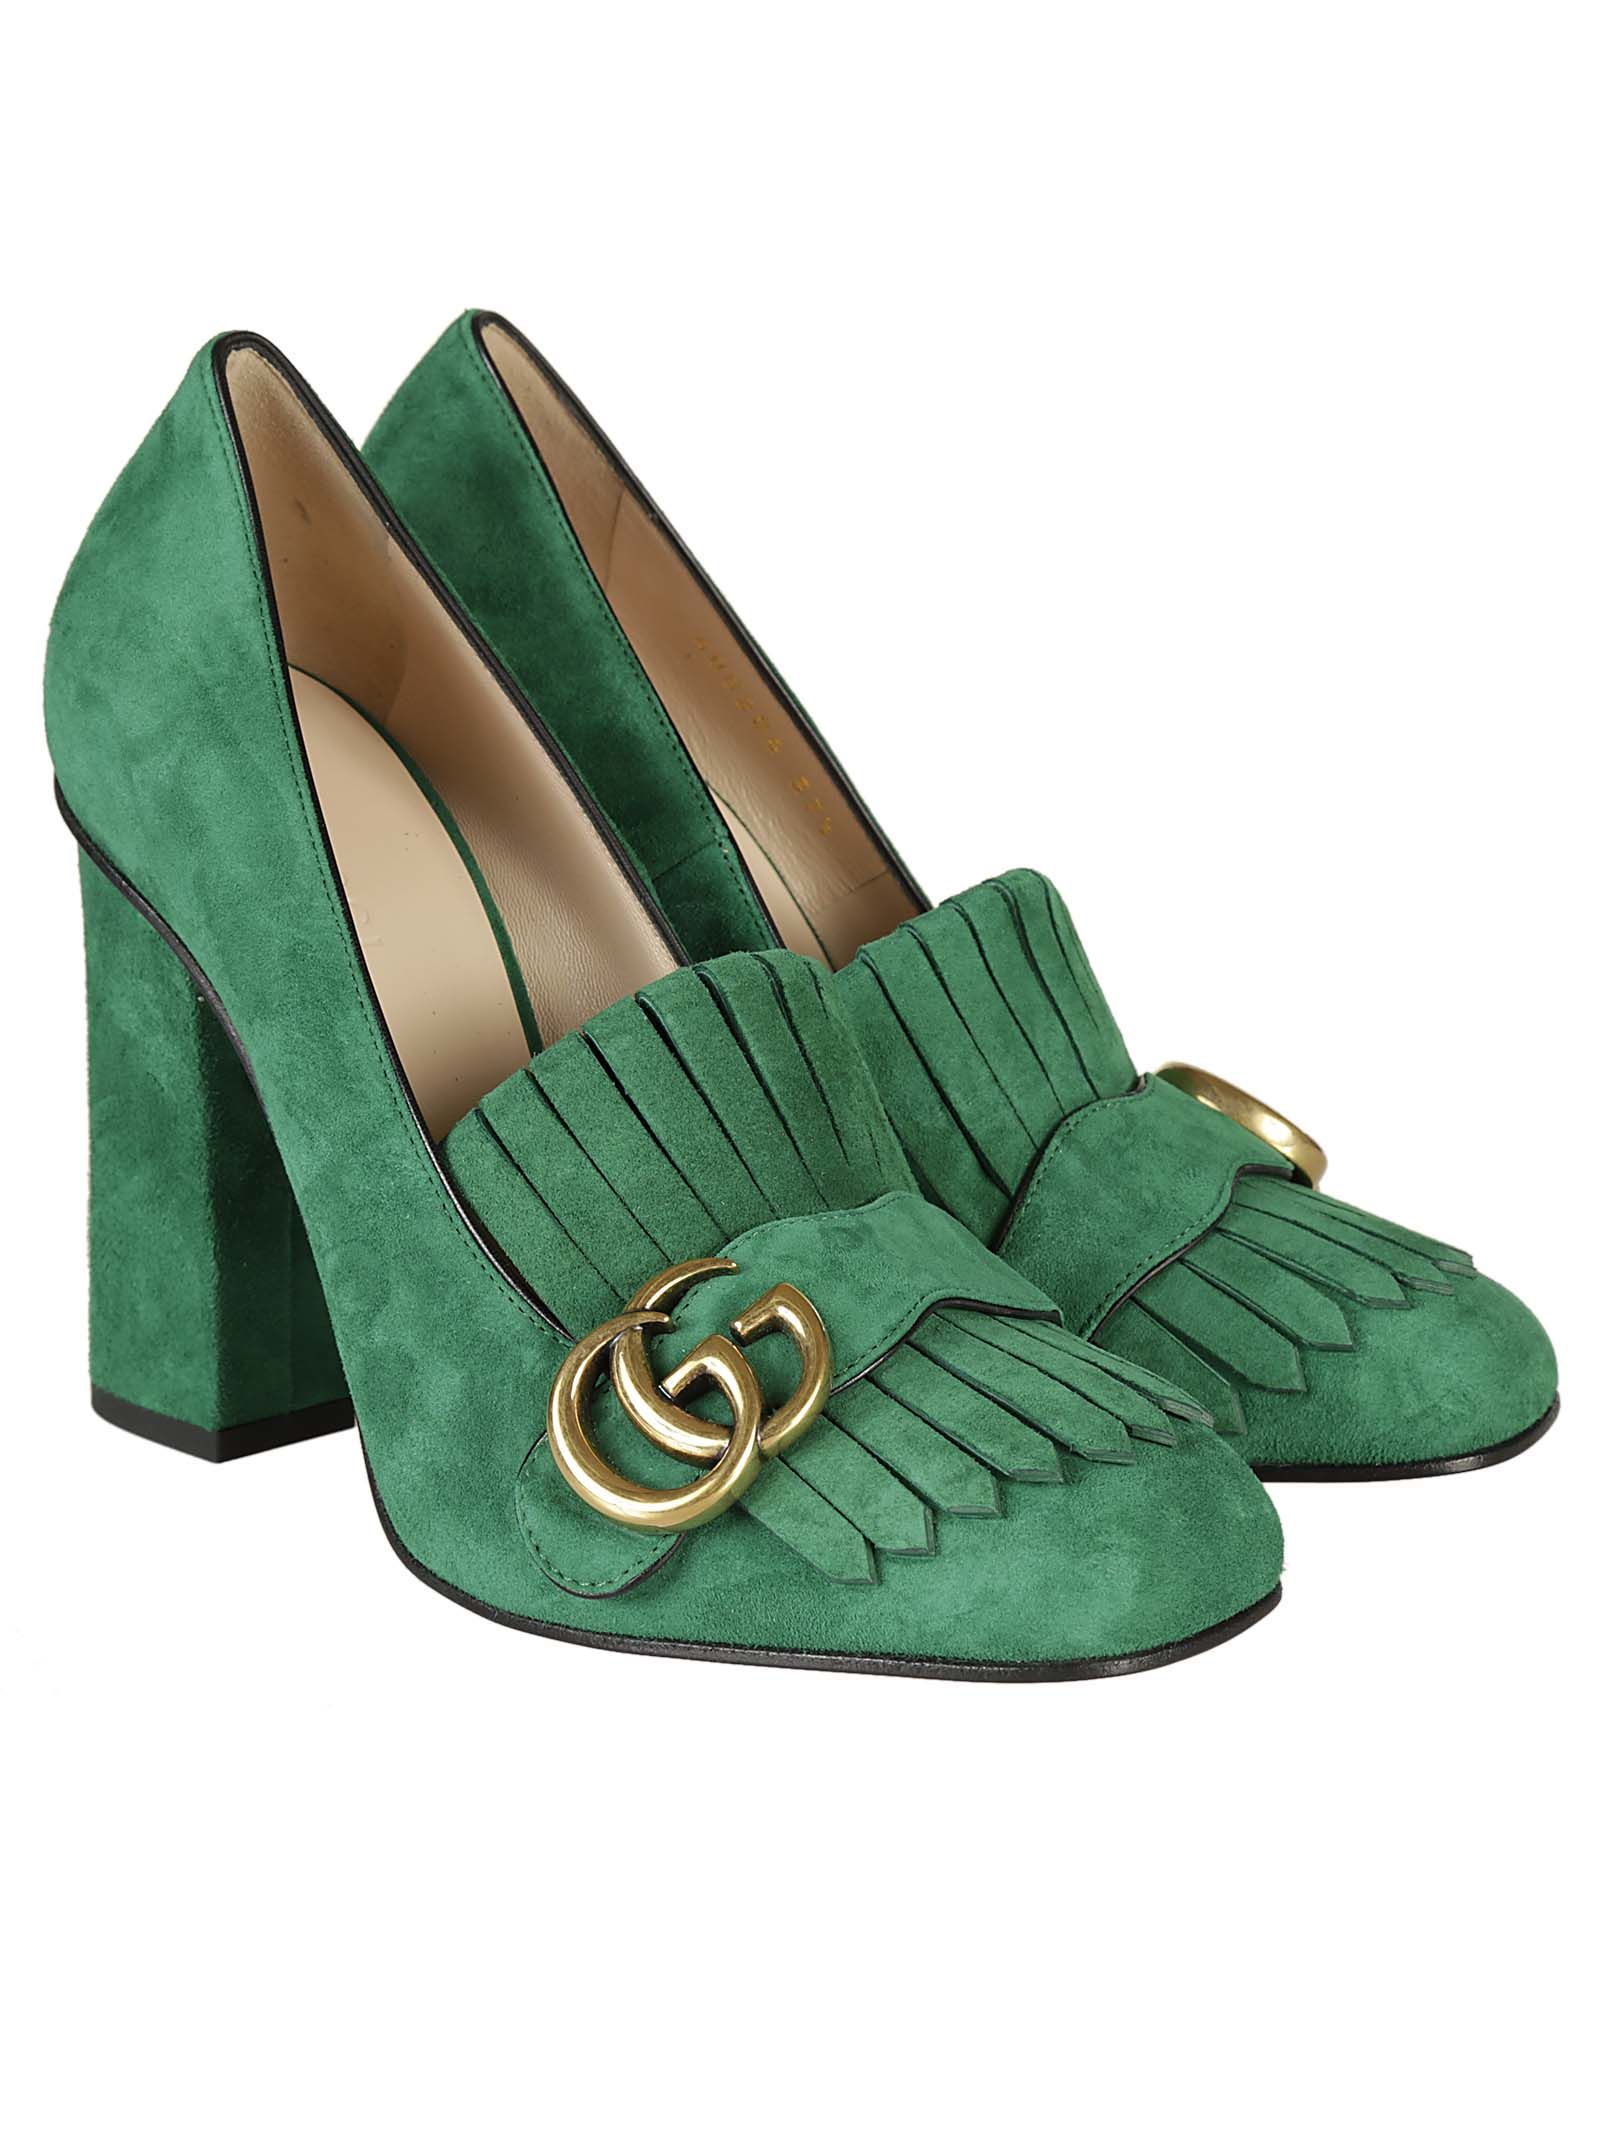 italist | Best price in the market for Gucci Gucci Suede Pumps - Green ...